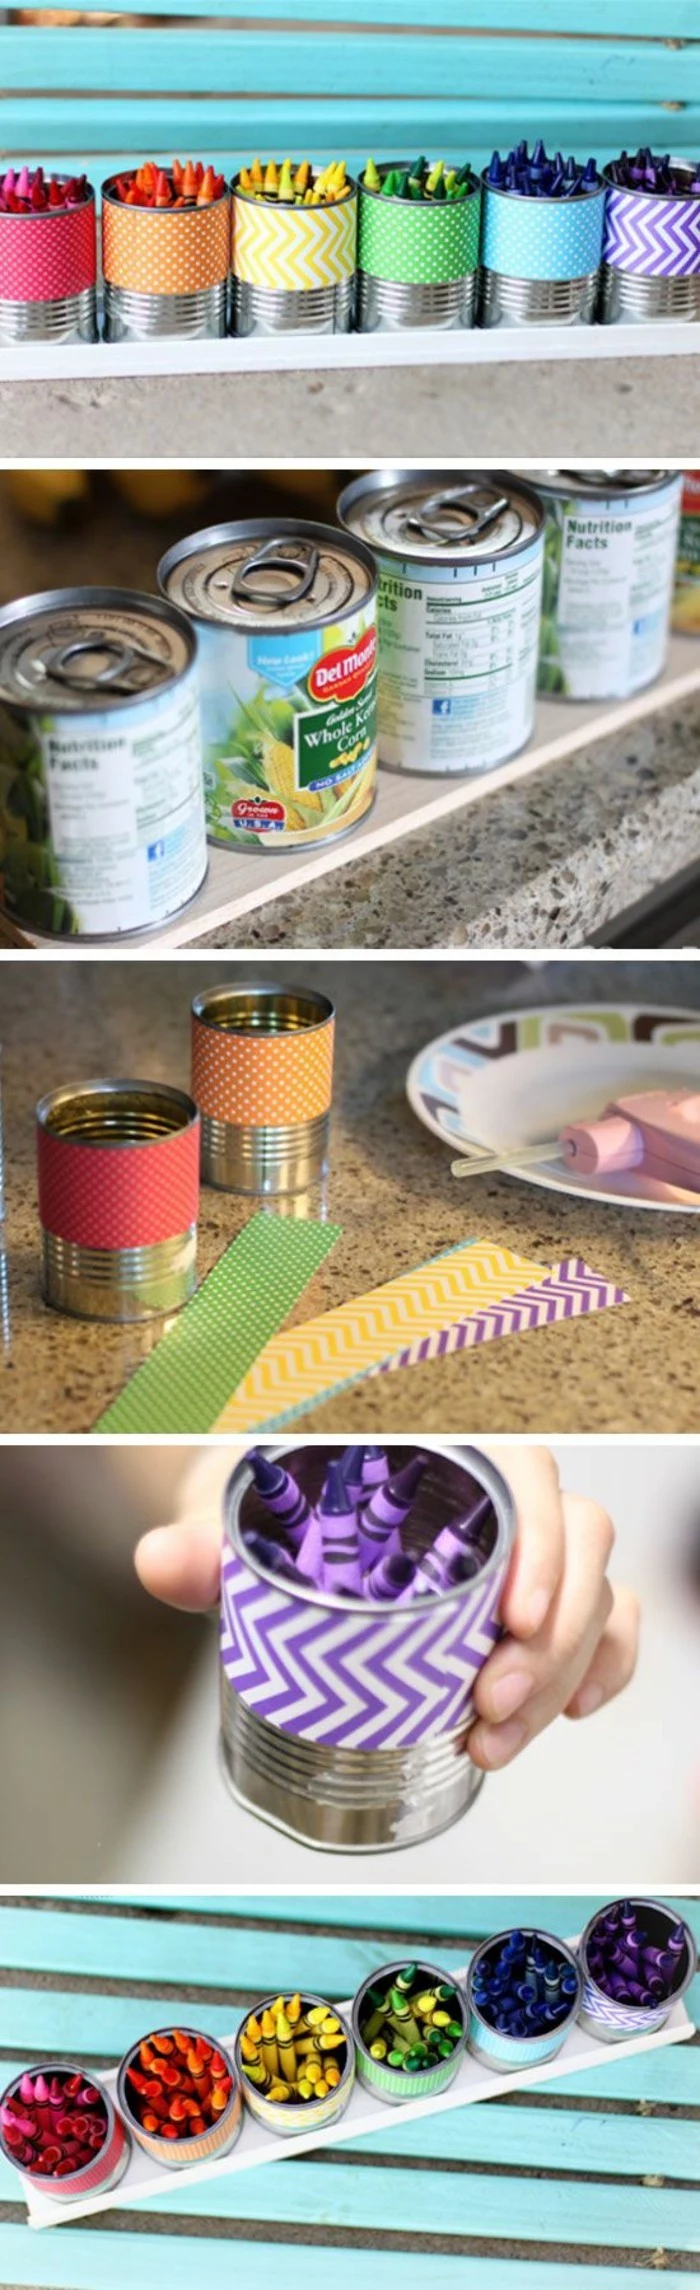 tin can crafts, six aluminium cans, decorated with paper in different colors, containing crayons in corresponding colors